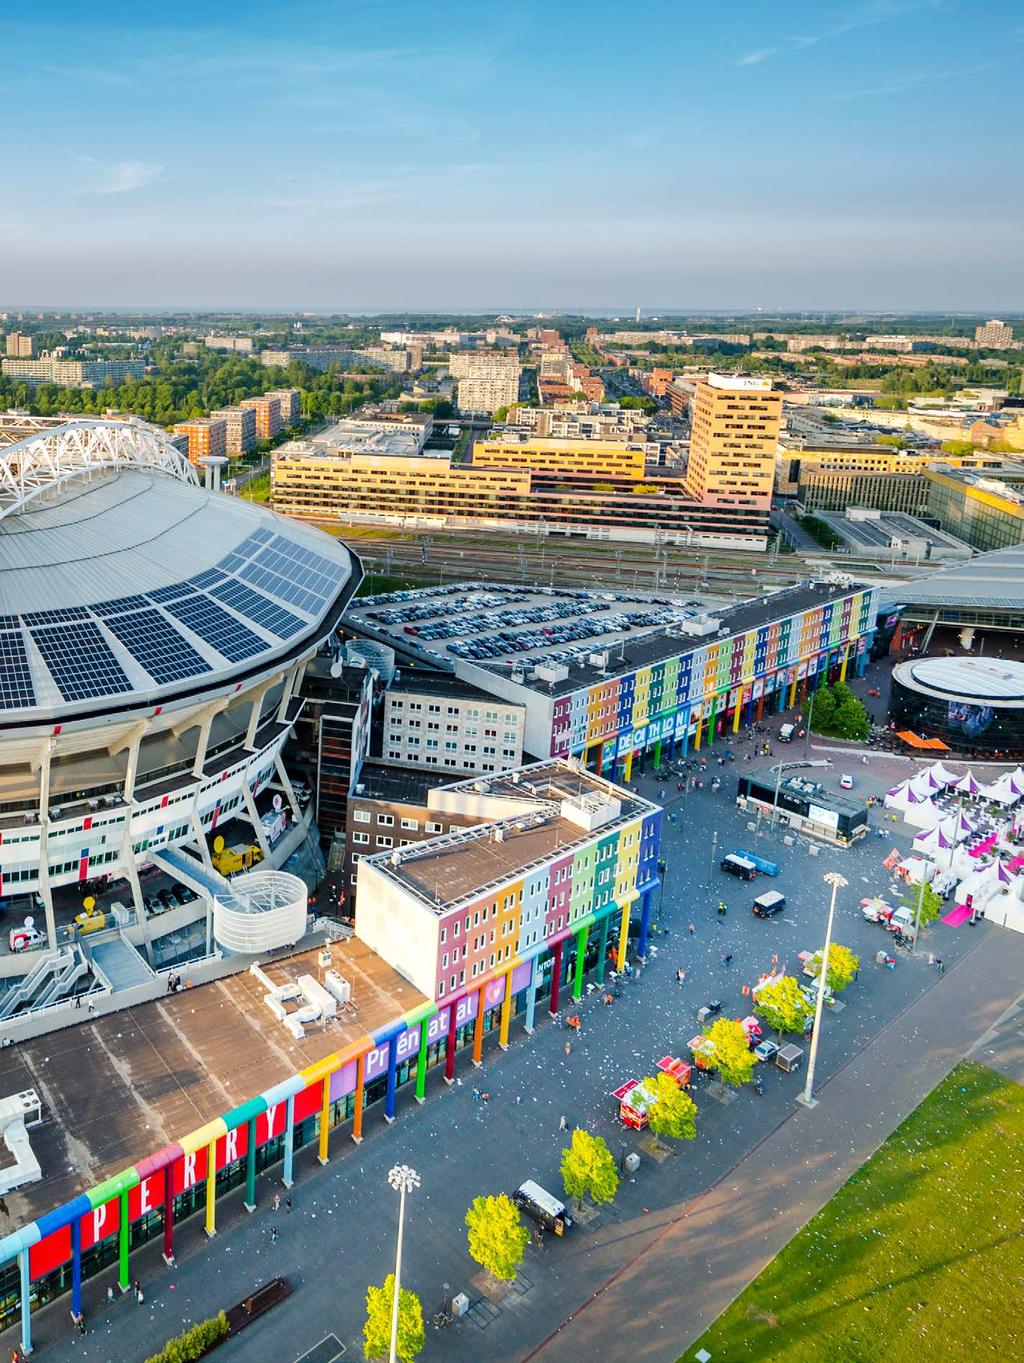 IoT Amsterdam Zuidoost becoming a smart city 5G AI Together with the Municipality of Amsterdam, KPN is working on smart 5G applications in the area of the Johan Cruijff ArenA.